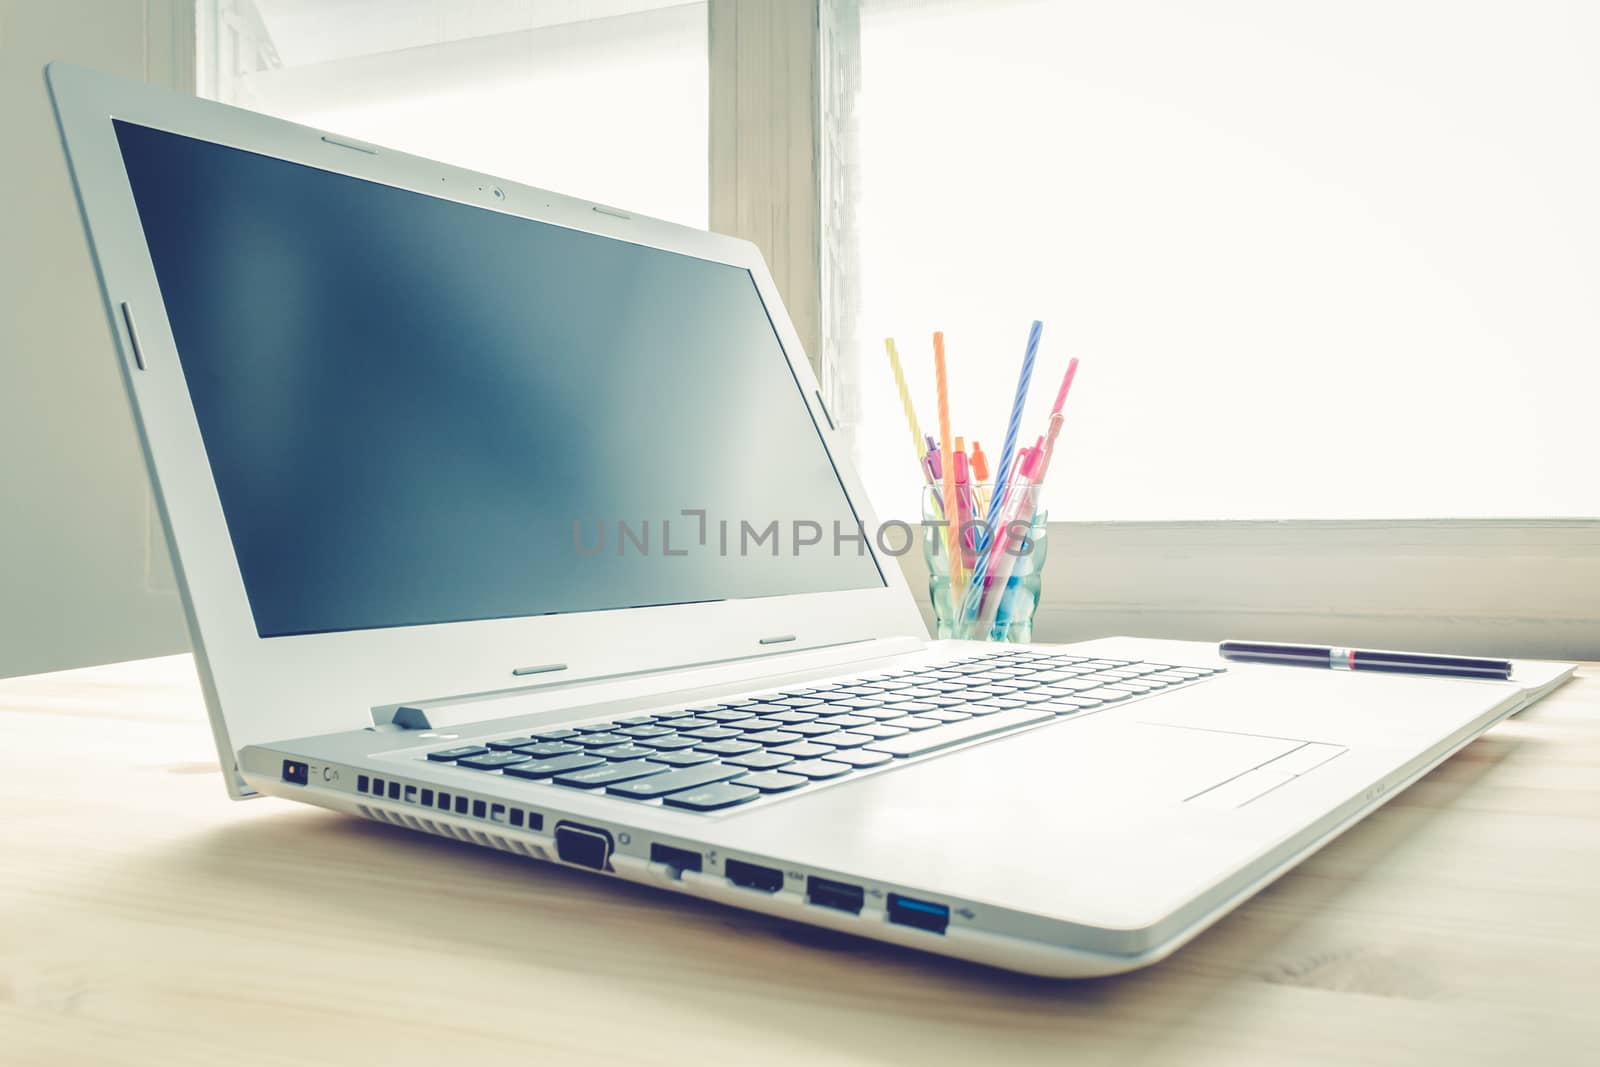 Laptop and Notebook and Pen on Wood Table Vintage Style by steafpong